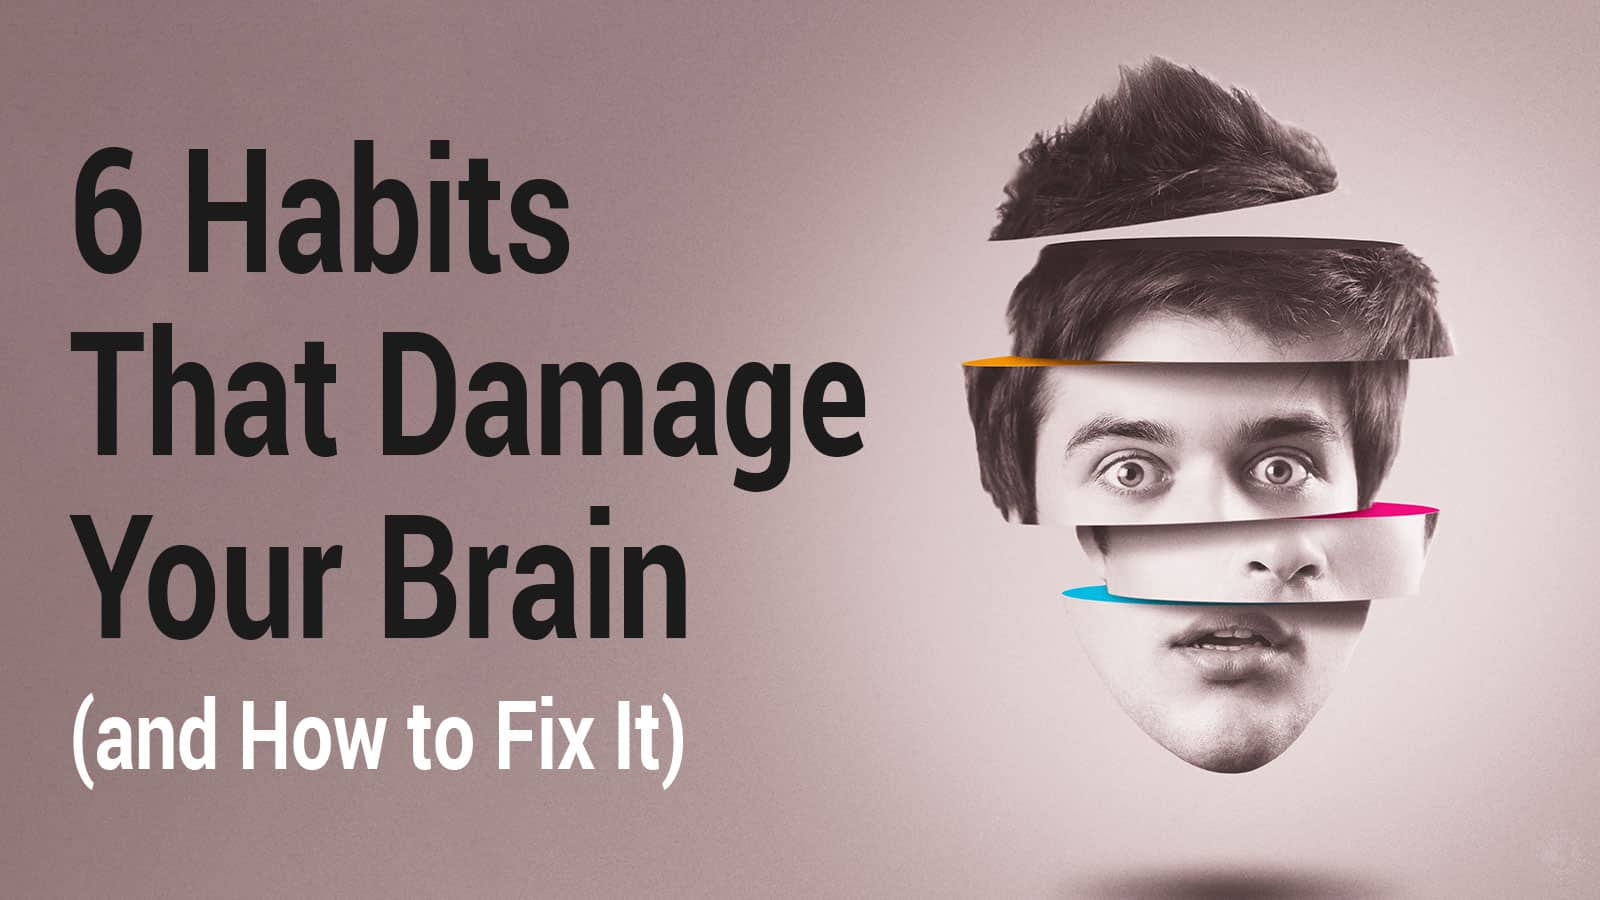 6 Habits That Damage Your Brain (and How to Fix It)